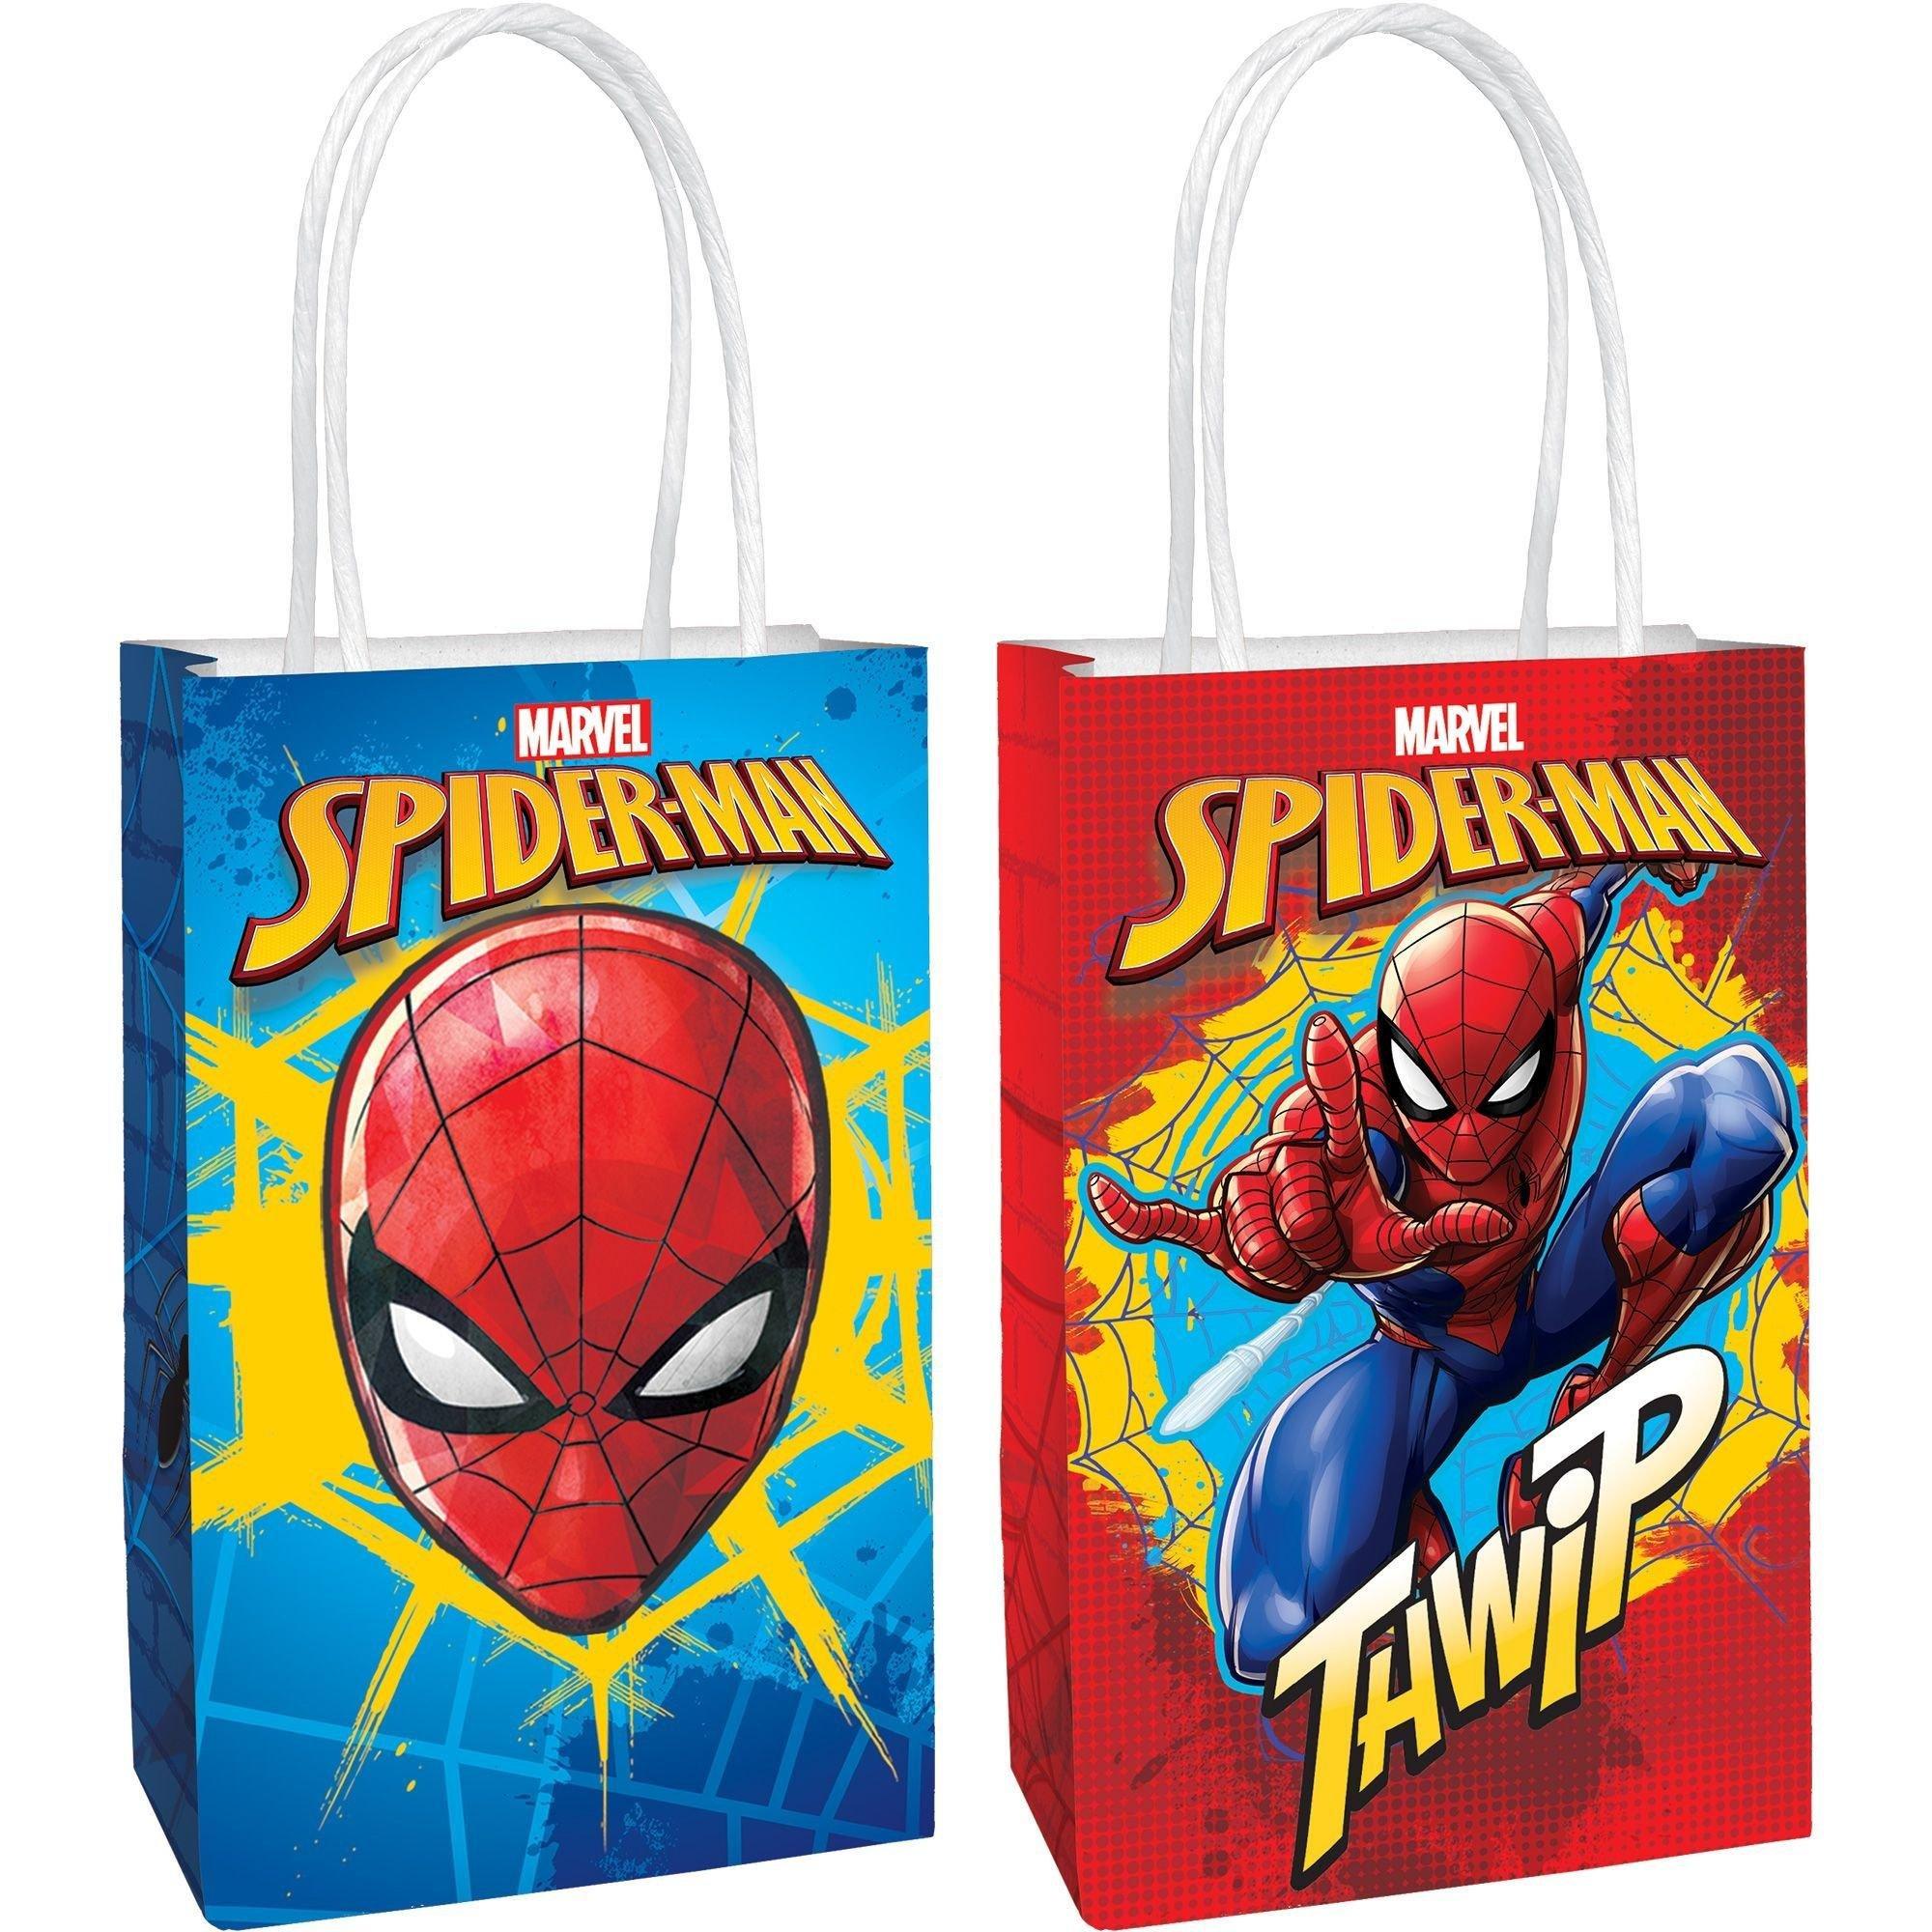 Spider-Man Basic Party Favor Supplies Pack for 8 Guests - Kit Includes Favor Pack & Favor Bags